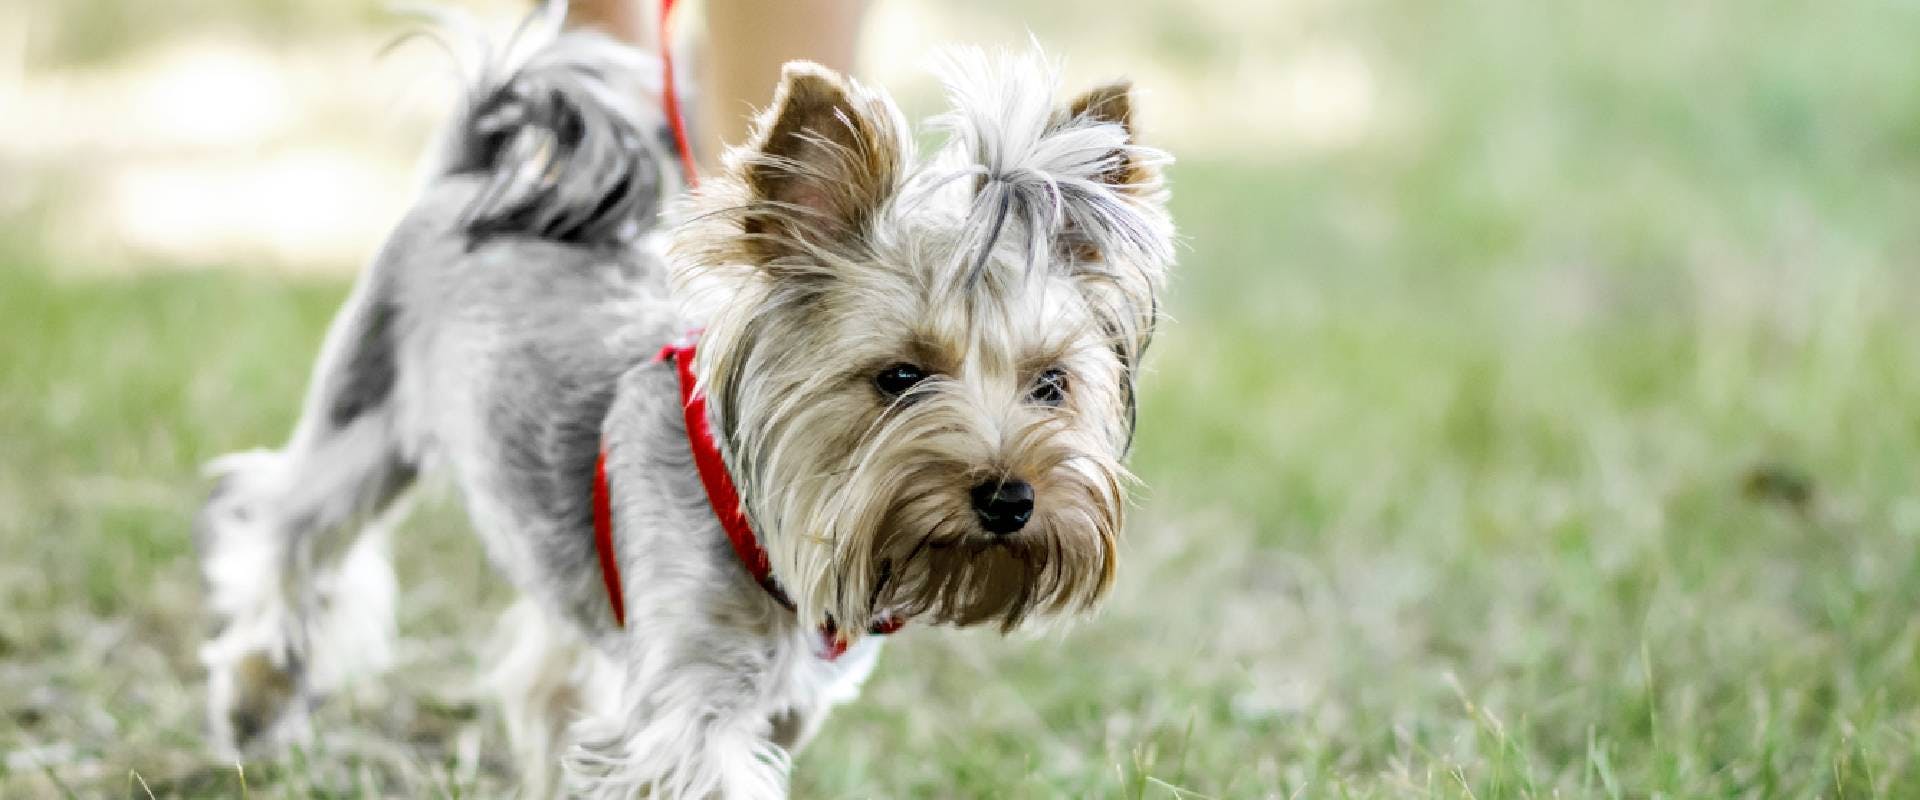 Yorkshire Terrier walking on a leash